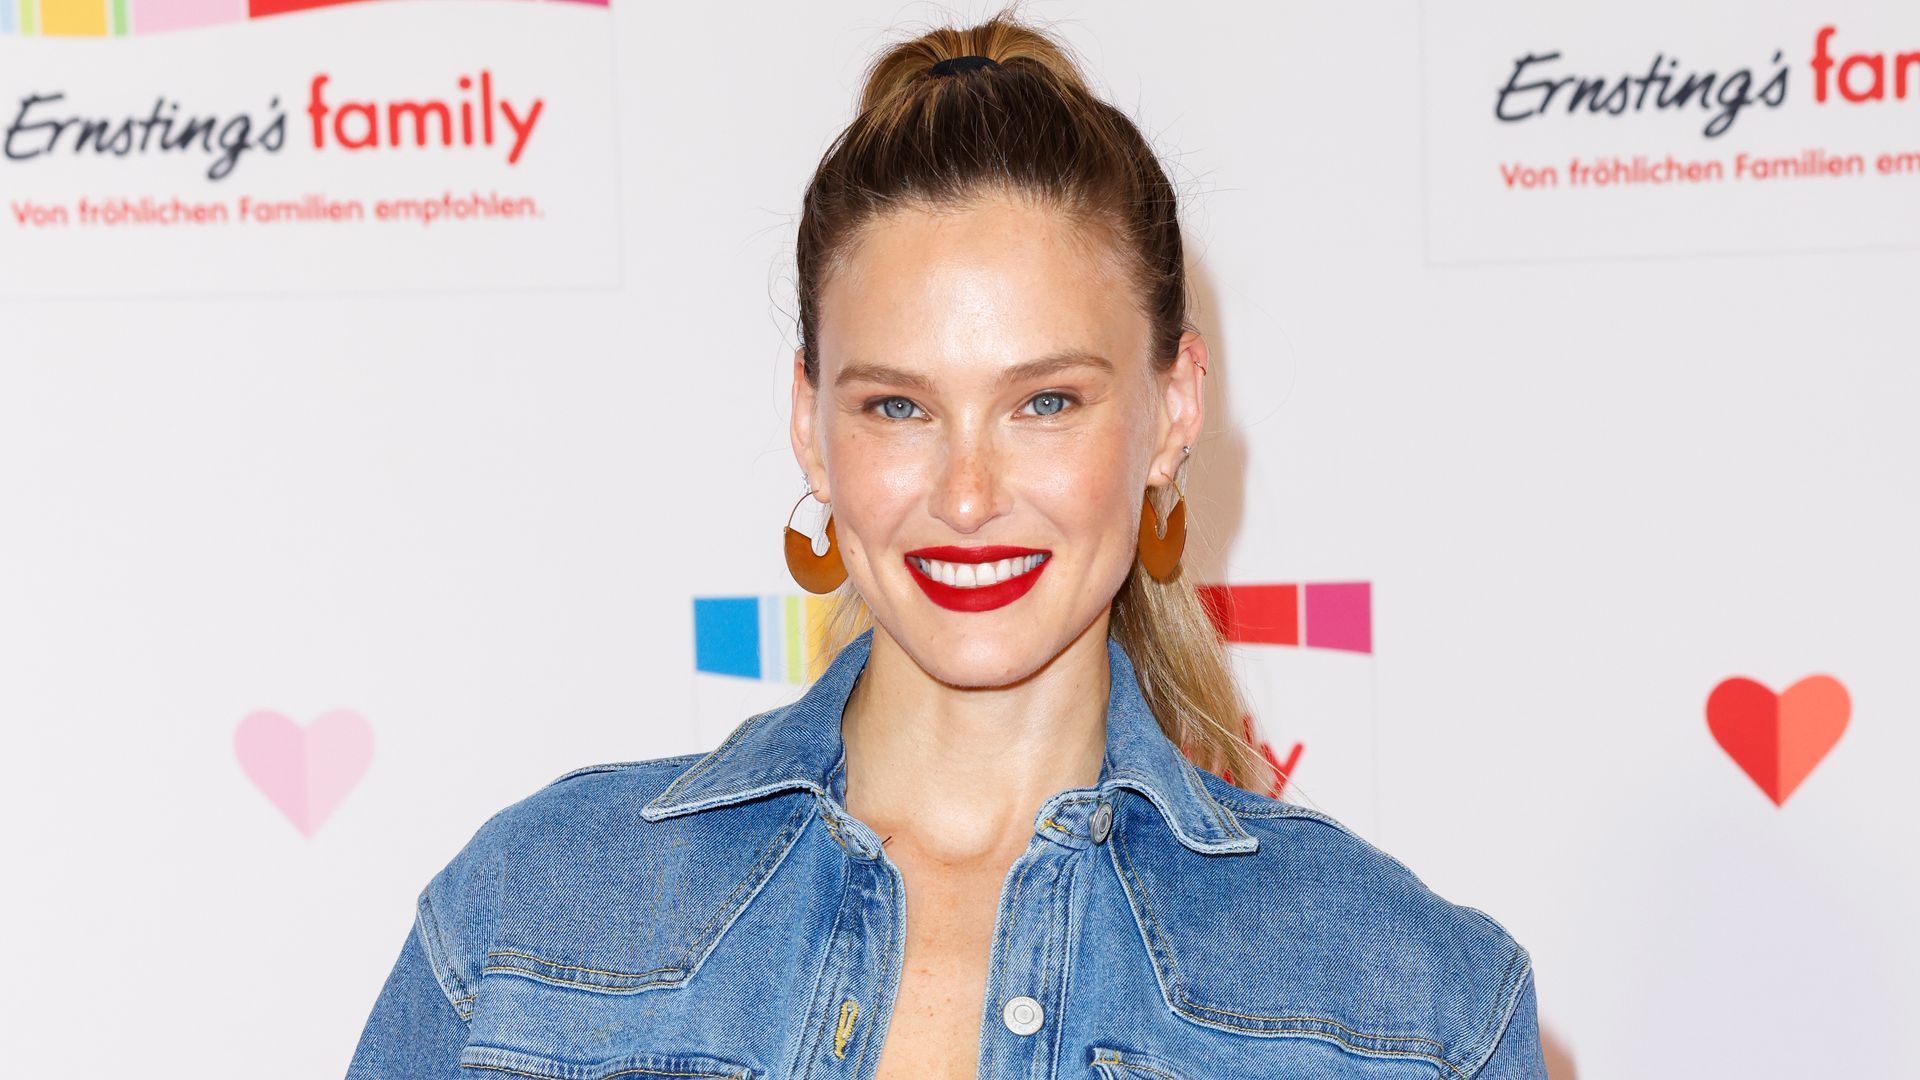 Bar Refaeli smiling for a photo on a red carpet